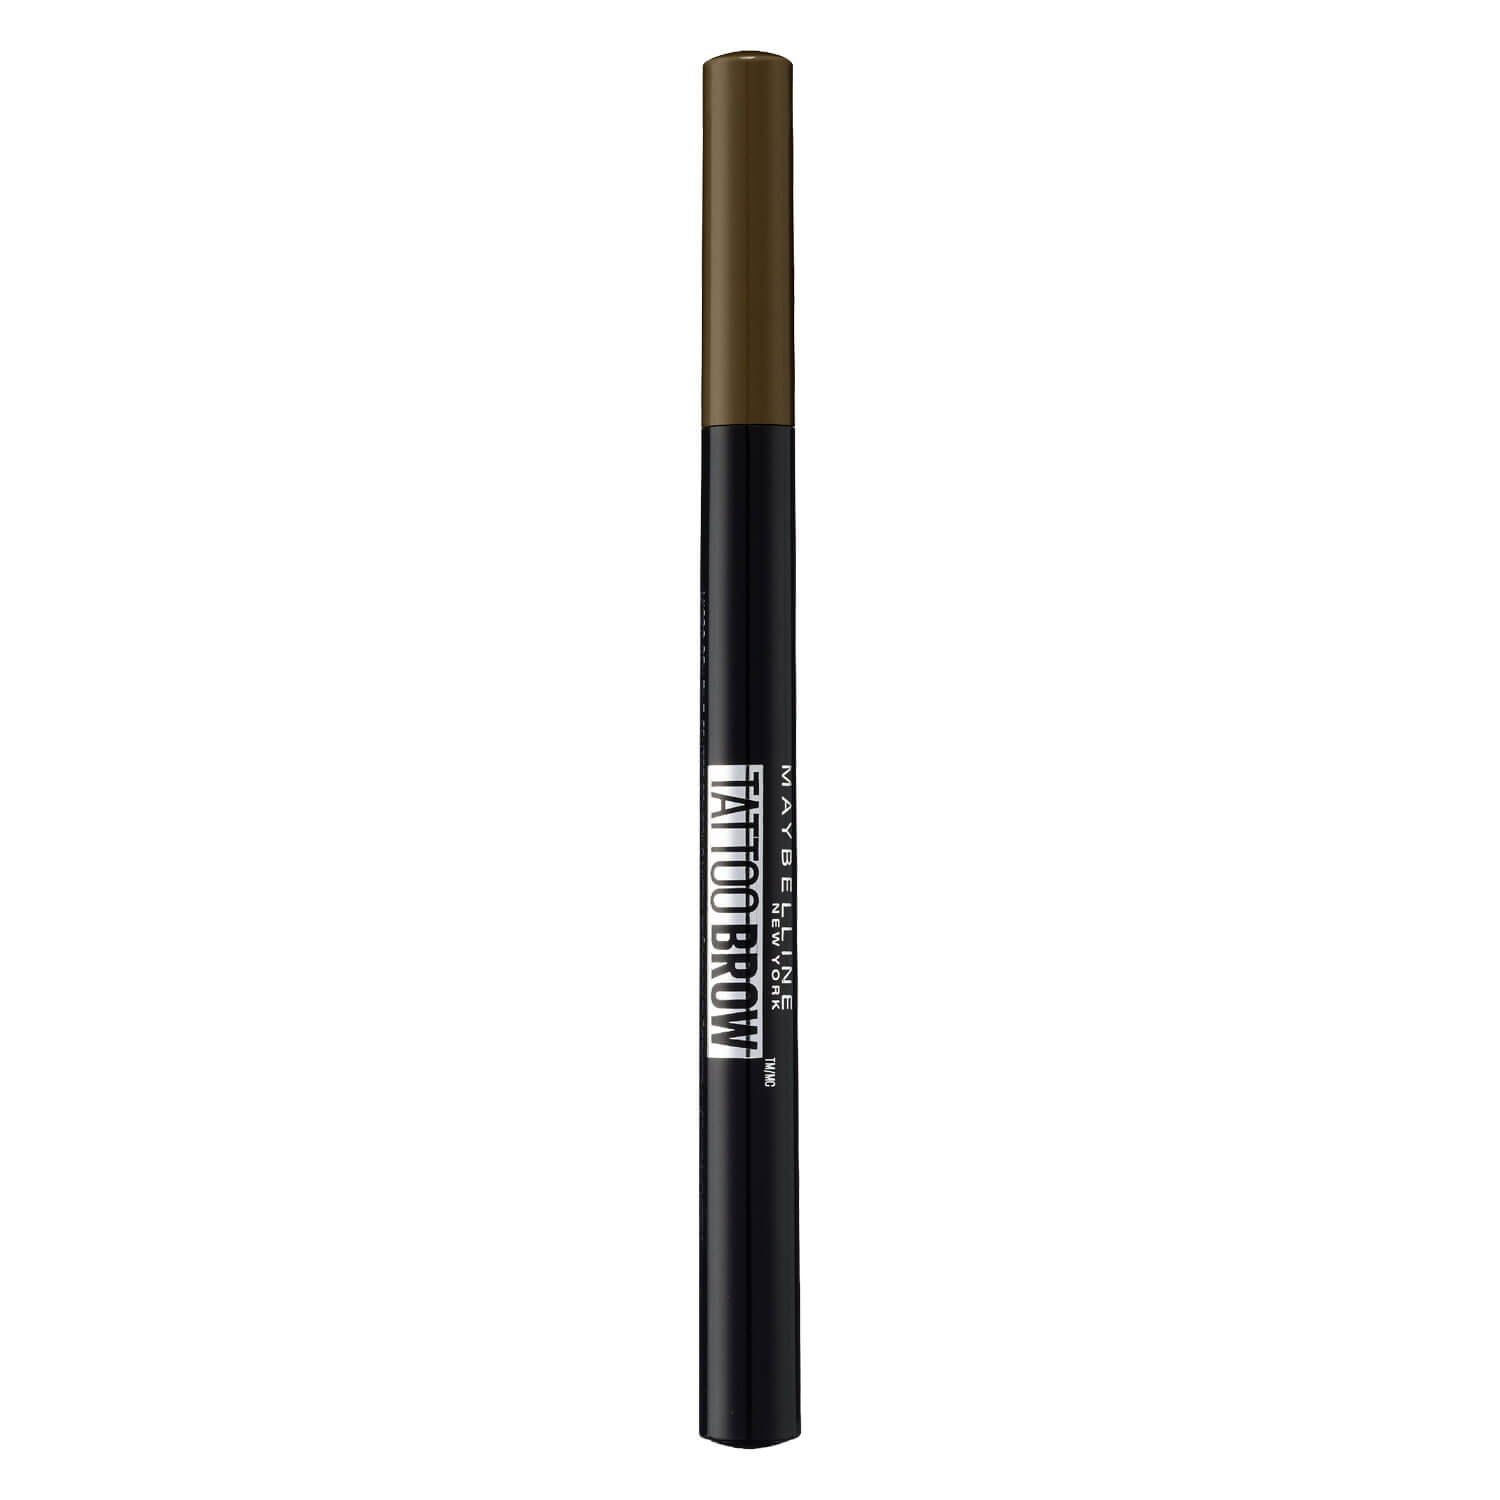 Maybelline NY Brows - Nr. 130 Augenbrauenstift Brow Tattoo Brown Deep